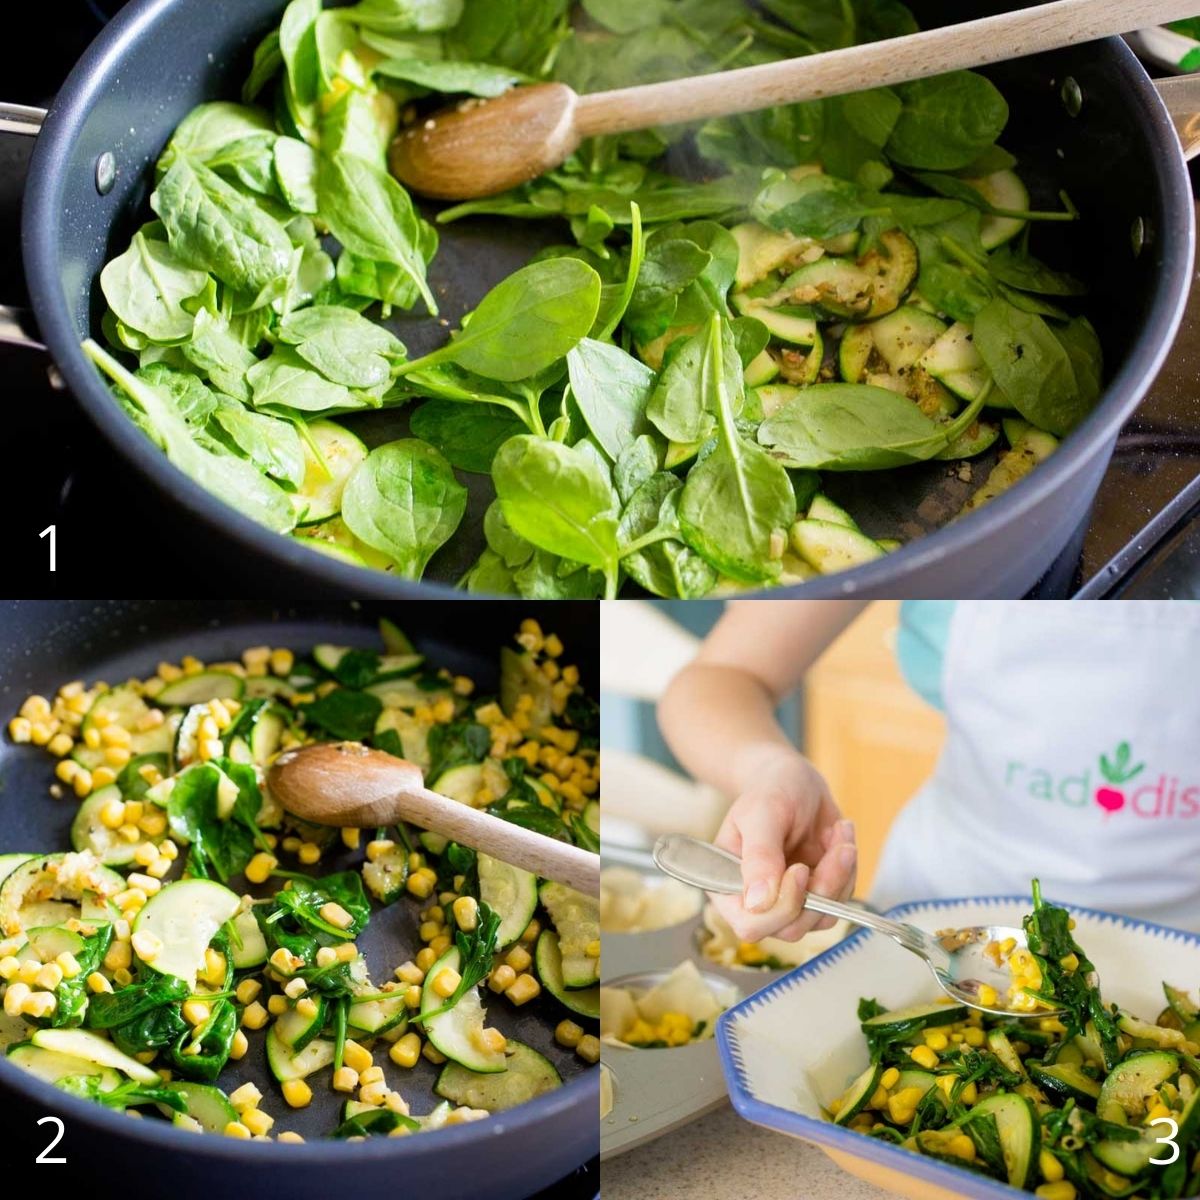 A series of photos show how to cook the spinach and corn for the lasagna.